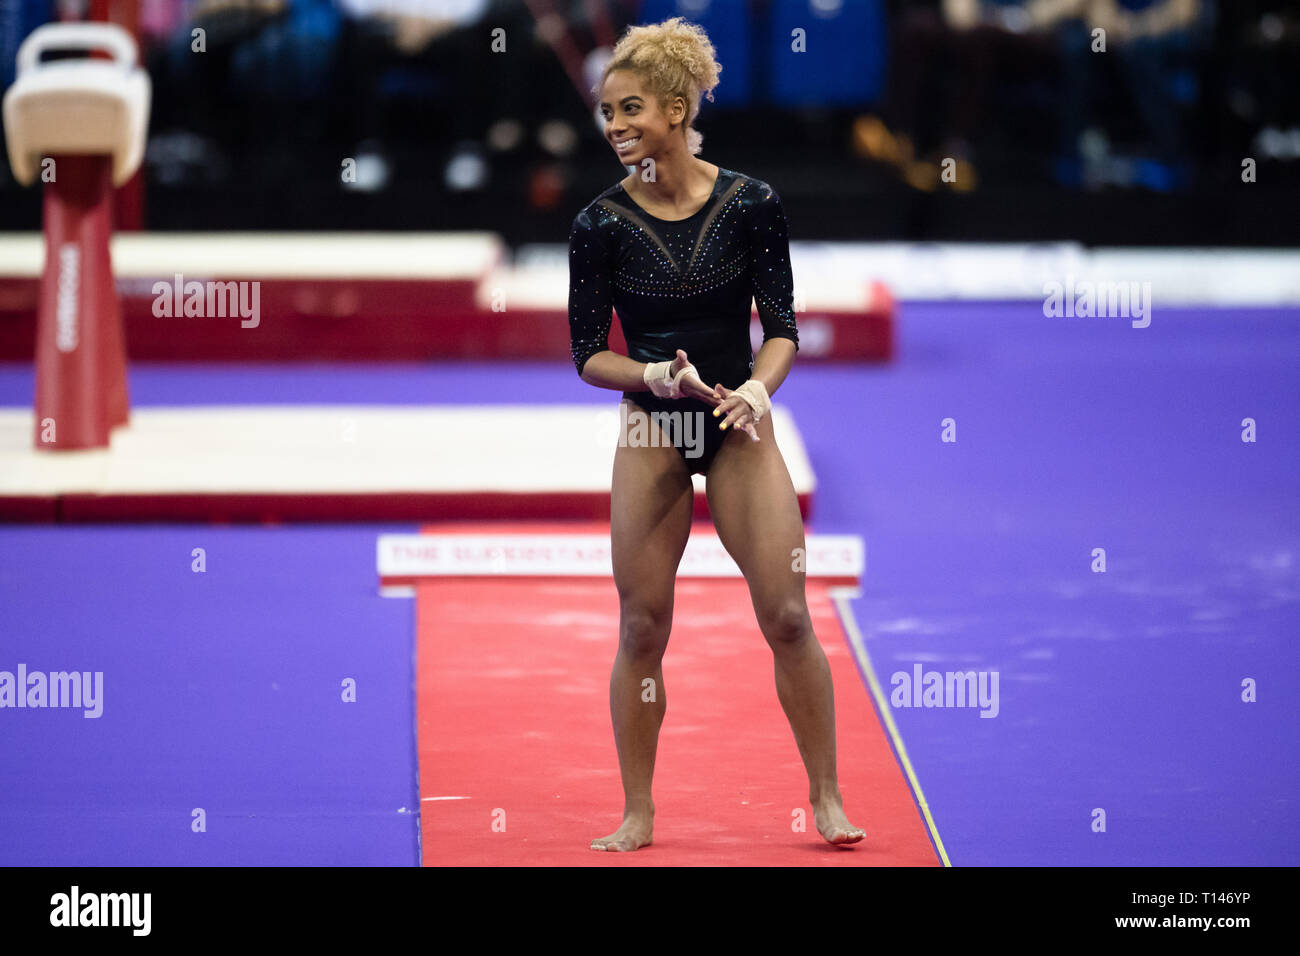 London, UK. 23rd March, 2019. Danusia Francis performs on the Vault during the Matchroom Multisport presents the 2019 Superstars of Gymnastics at The O2 Arena on Saturday, 23 March 2019. LONDON ENGLAND. Credit: Taka G Wu/Alamy News Stock Photo